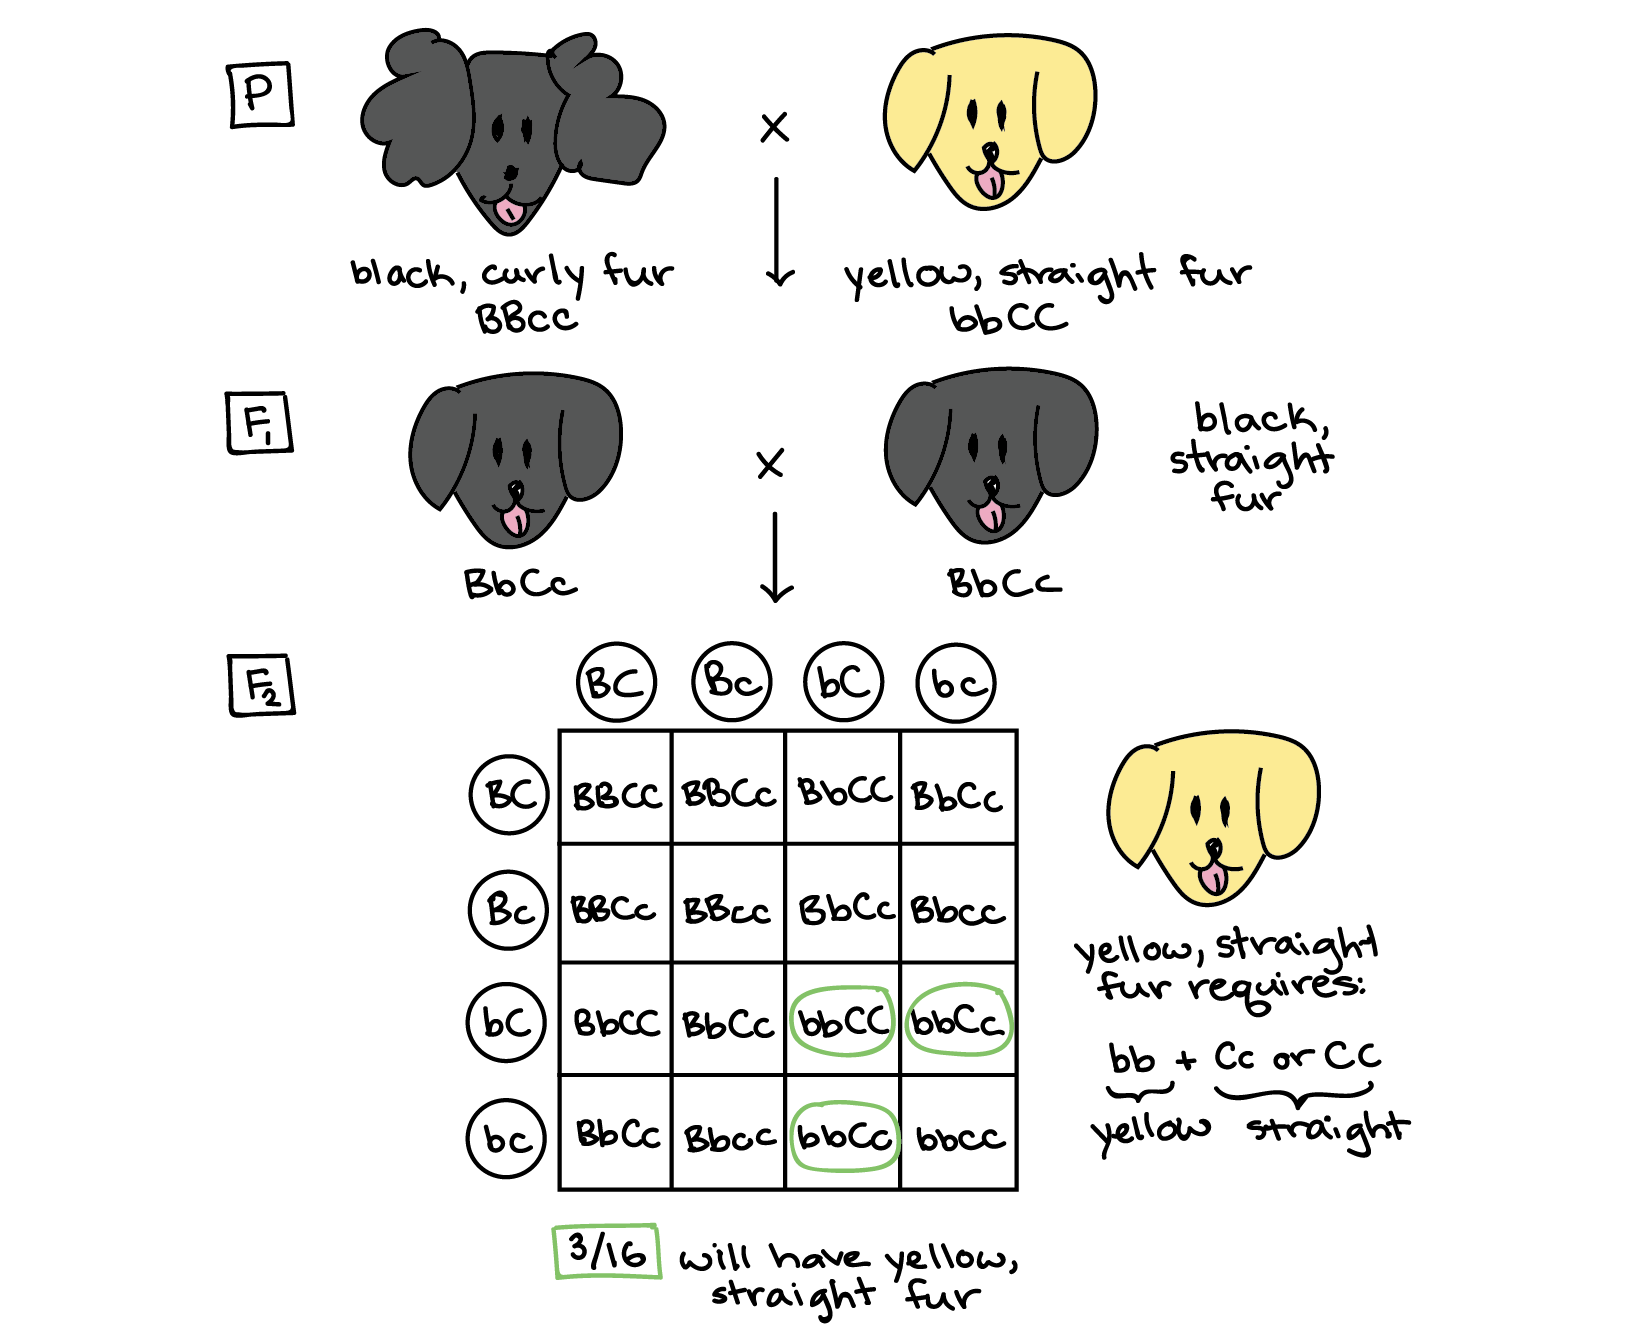 Annotated diagram illustrating the solution to the dog fur problem. P generation: Black, curly-furred parent is of genotype BBcc. Yellow, straight-furred parent is of genotype bbCC. F1 generation: All F1 dogs are of genotype BbCc. The F1 dogs are interbred to produce an F2 generation. F2 generation: Punnett square:||BC|Bc|bC|bc-|-|-|-|-|-BC||BBCC|BBCc|BbCC|BbCcBc||BBCc|BBcc|BbCc|BbccbC||BbCC|BbCc|**bbCC**|**bbCc**bc||BbCc|Bbcc|**bbCc**|bbcc Puppies of bbCC or bbCc genotypes will be yellow and have straight fur. 3 out of the 16 boxes of the Punnett square correspond to these genotypes.